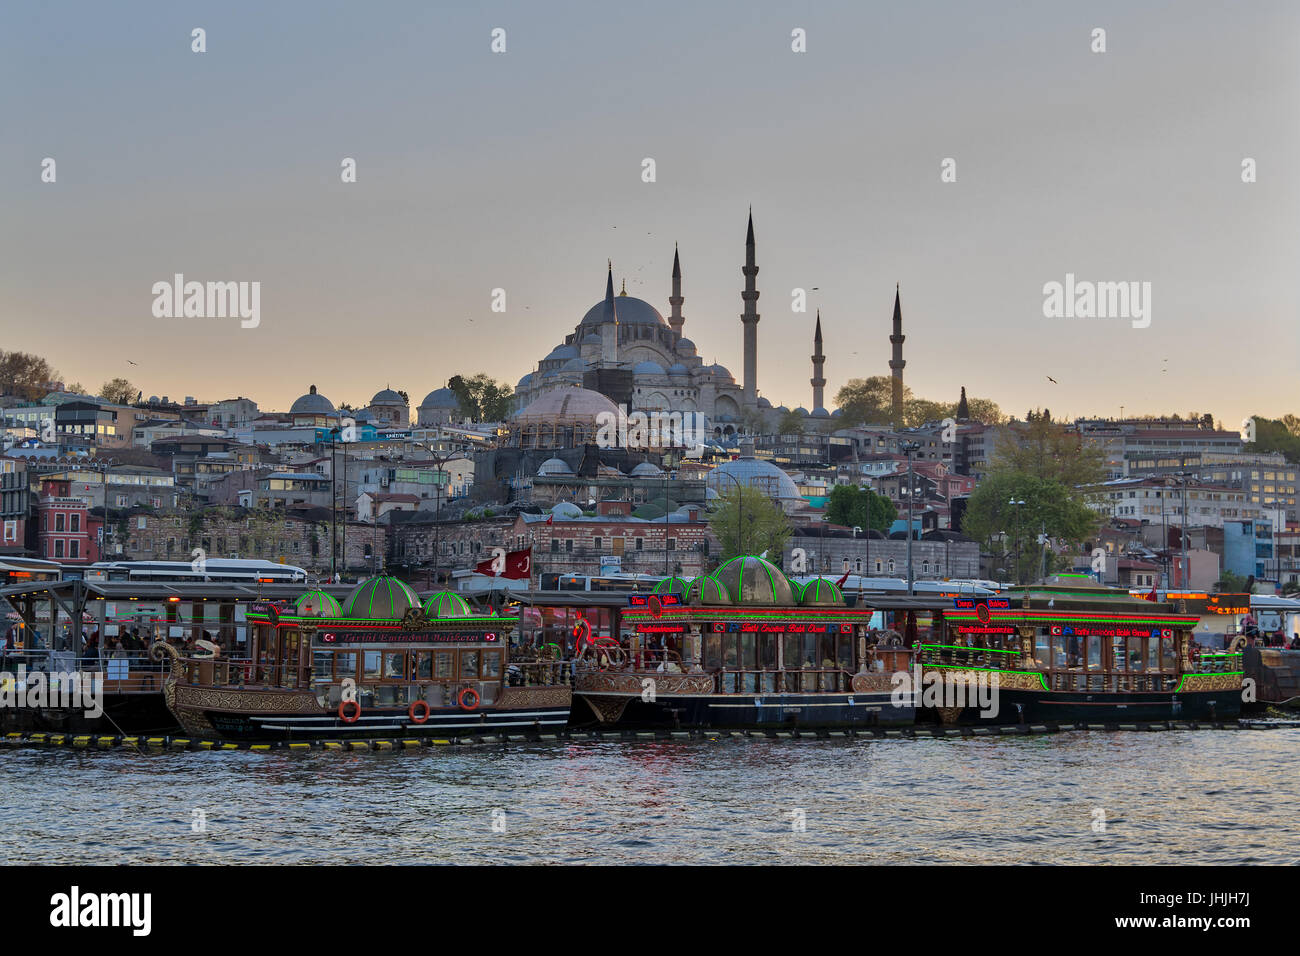 Istanbul, Turkey - April 25, 2017: Traditional fast food bobbing boats serving fish sandwiches at Eminonu district with Rustem Pasha Mosque and Suleym Stock Photo